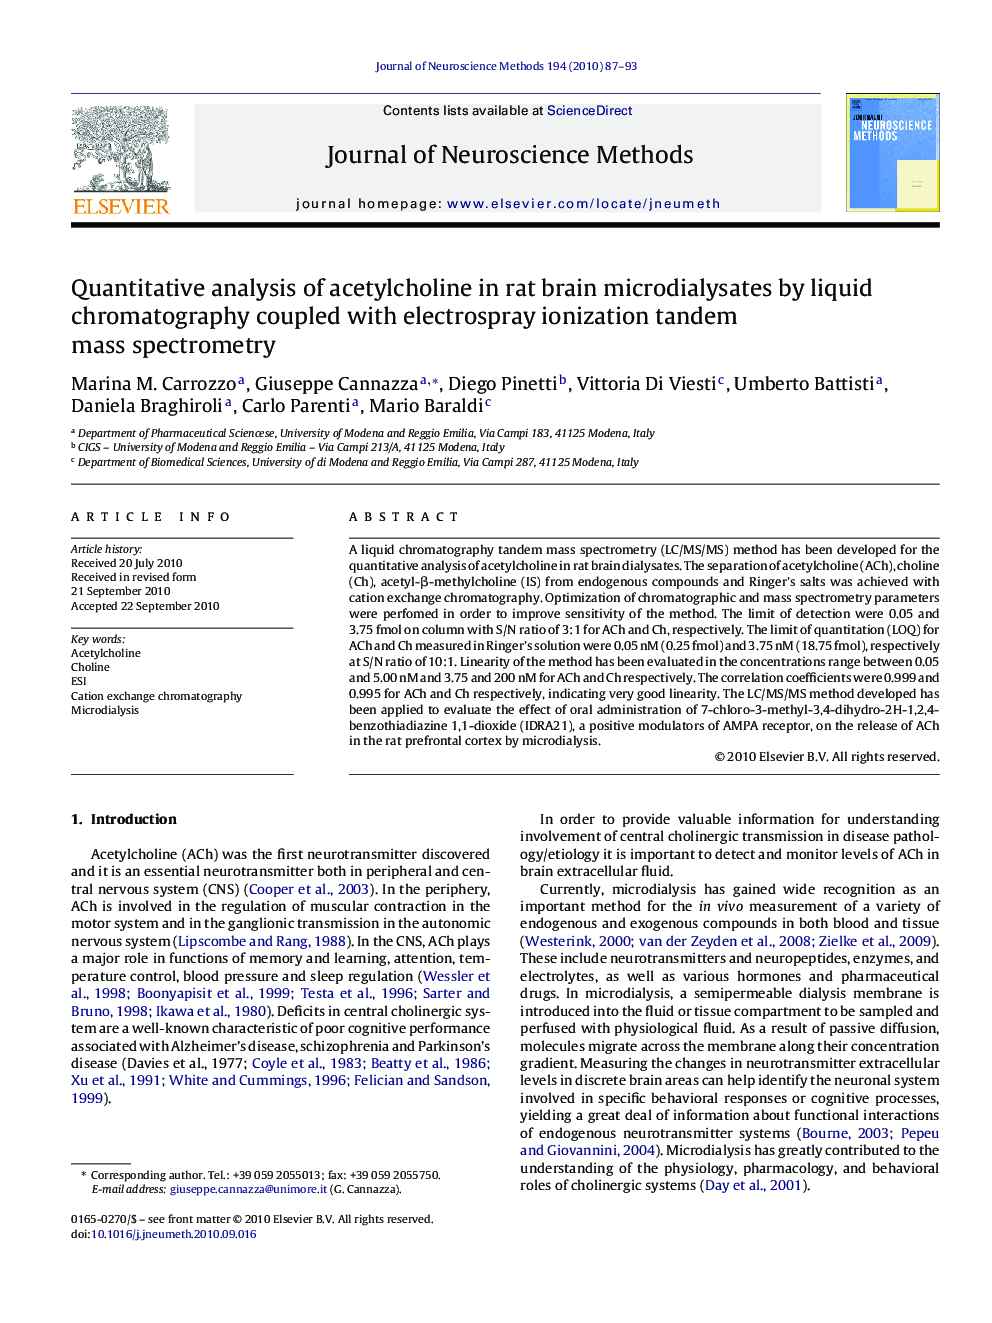 Quantitative analysis of acetylcholine in rat brain microdialysates by liquid chromatography coupled with electrospray ionization tandem mass spectrometry